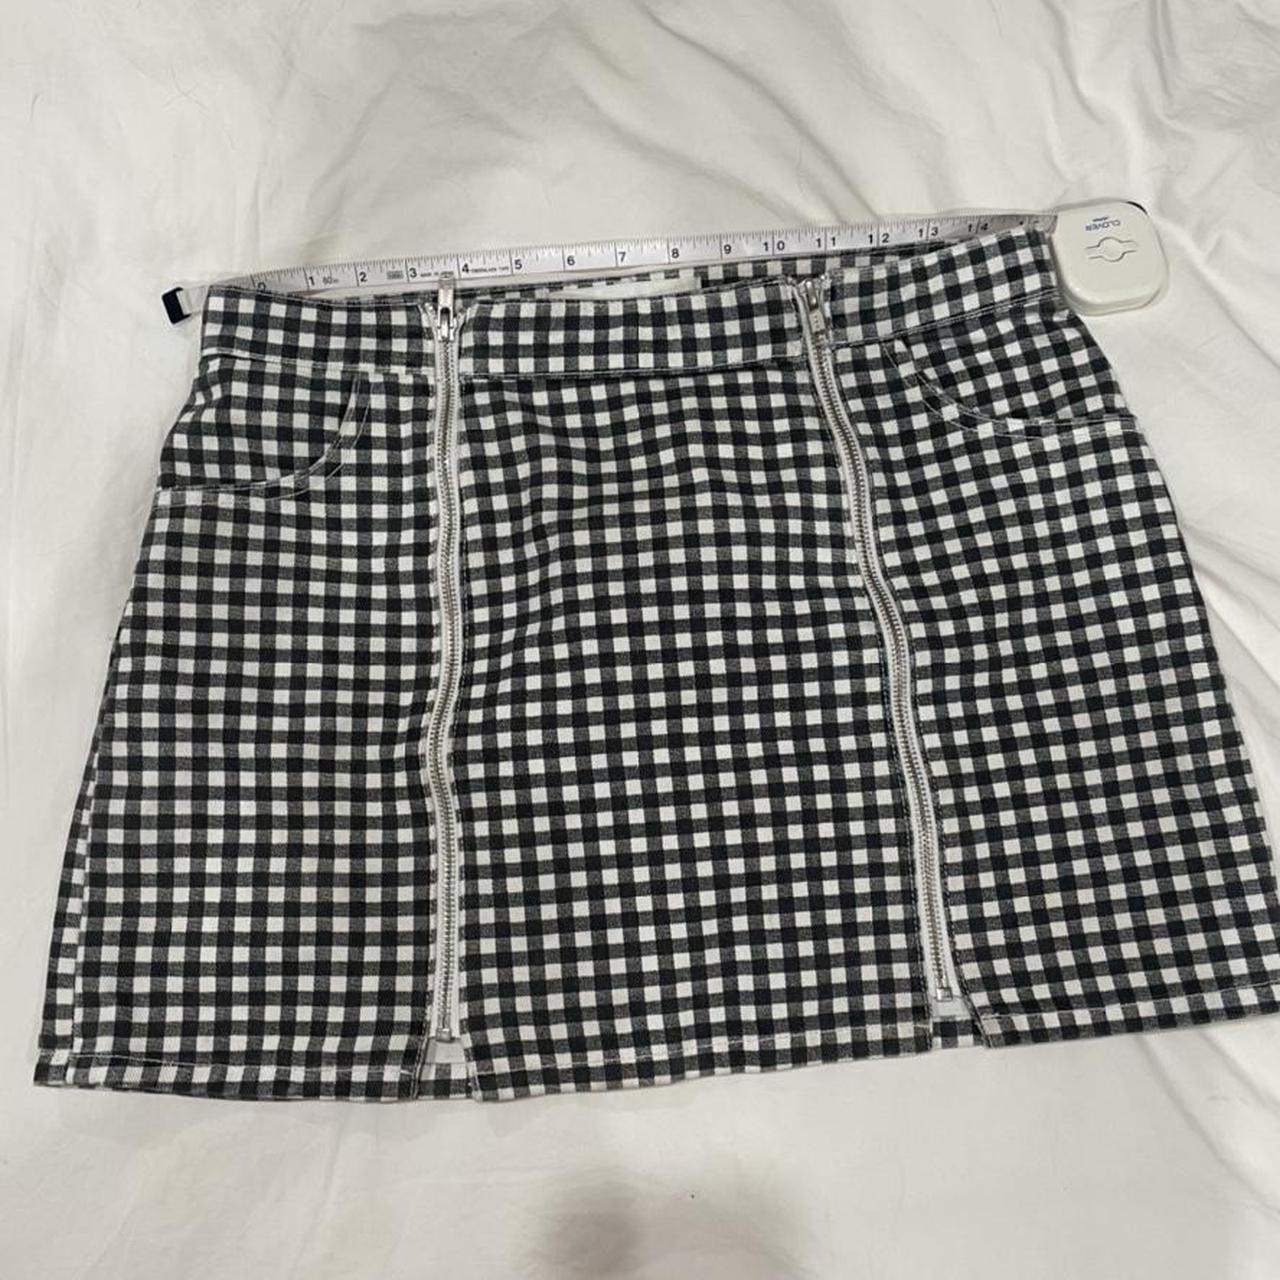 Gingham denim skirt by reformation - size 8. This... - Depop